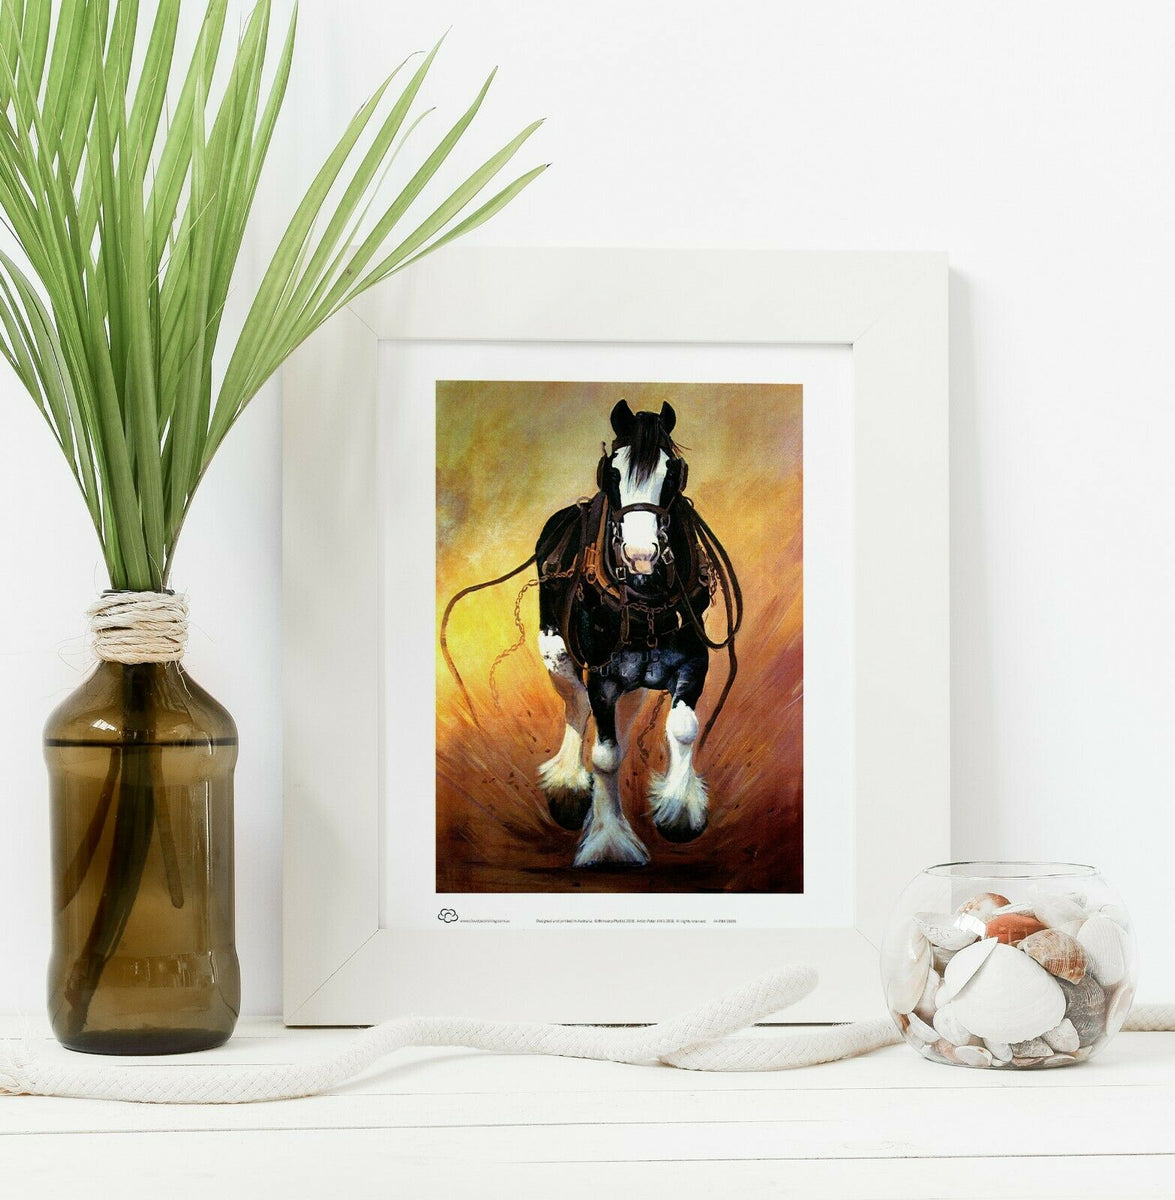 Running Clydesdale horse in harness greeting card by Peter Hill 